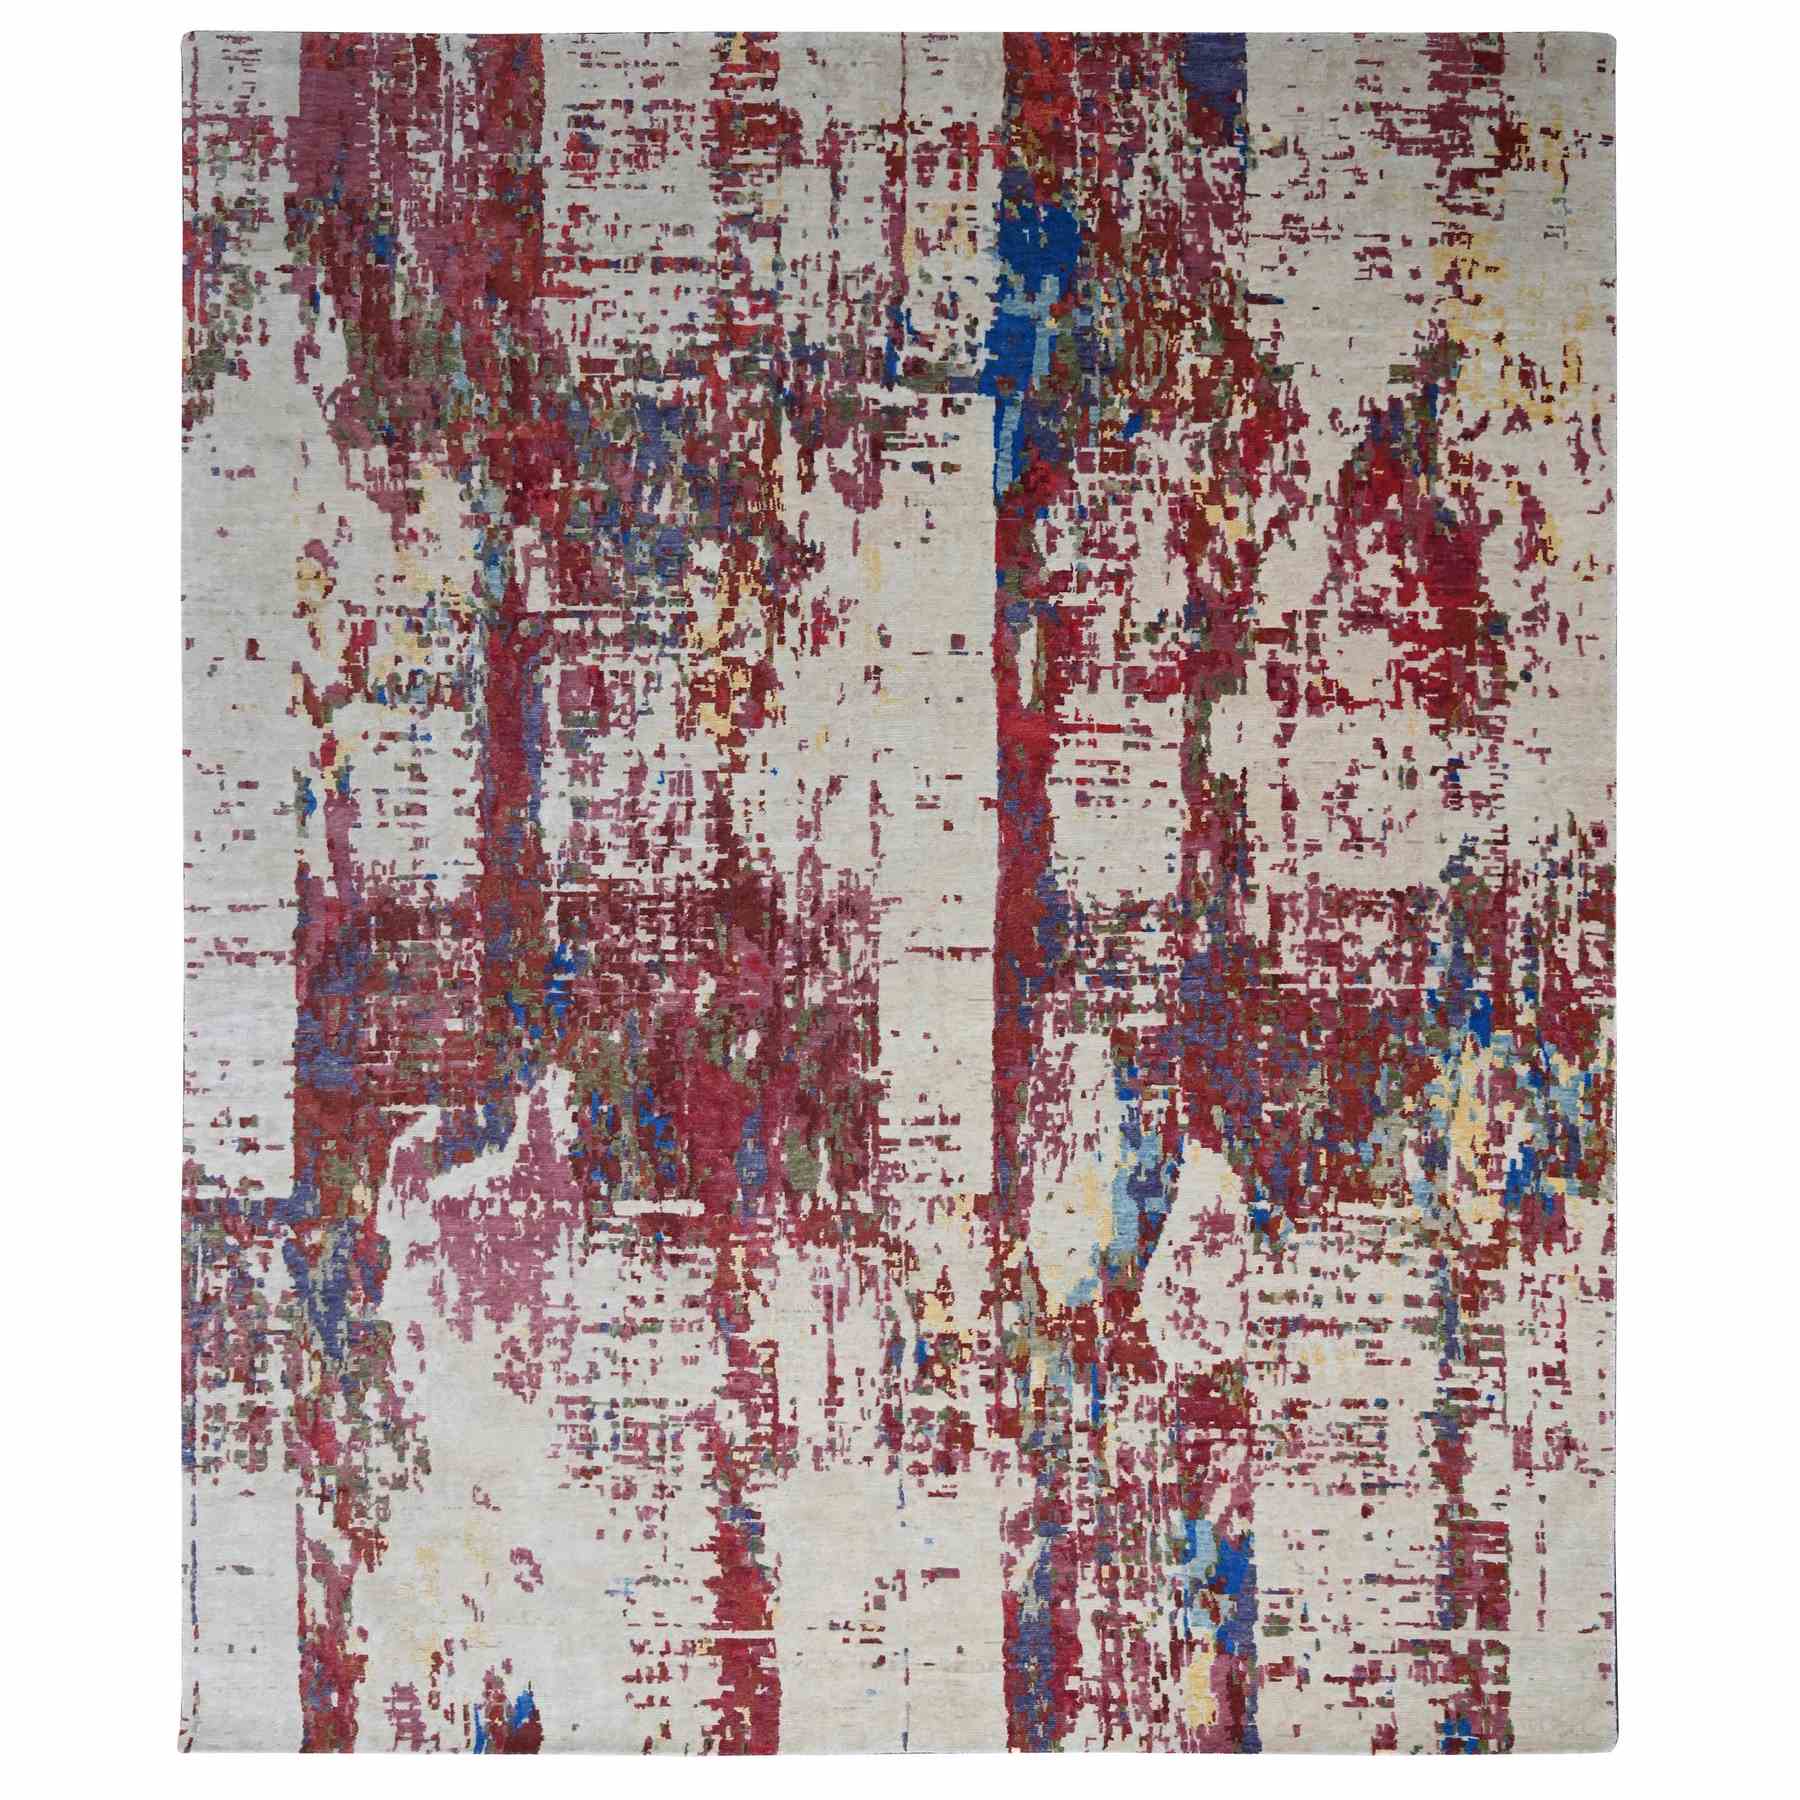 Accessible Beige With Cherries Jubilee Red, Hand Knotted Pure Wool, Modern Abstract Design, Nepali 100 Knots Weave, Tone on Tone Oriental Rug 